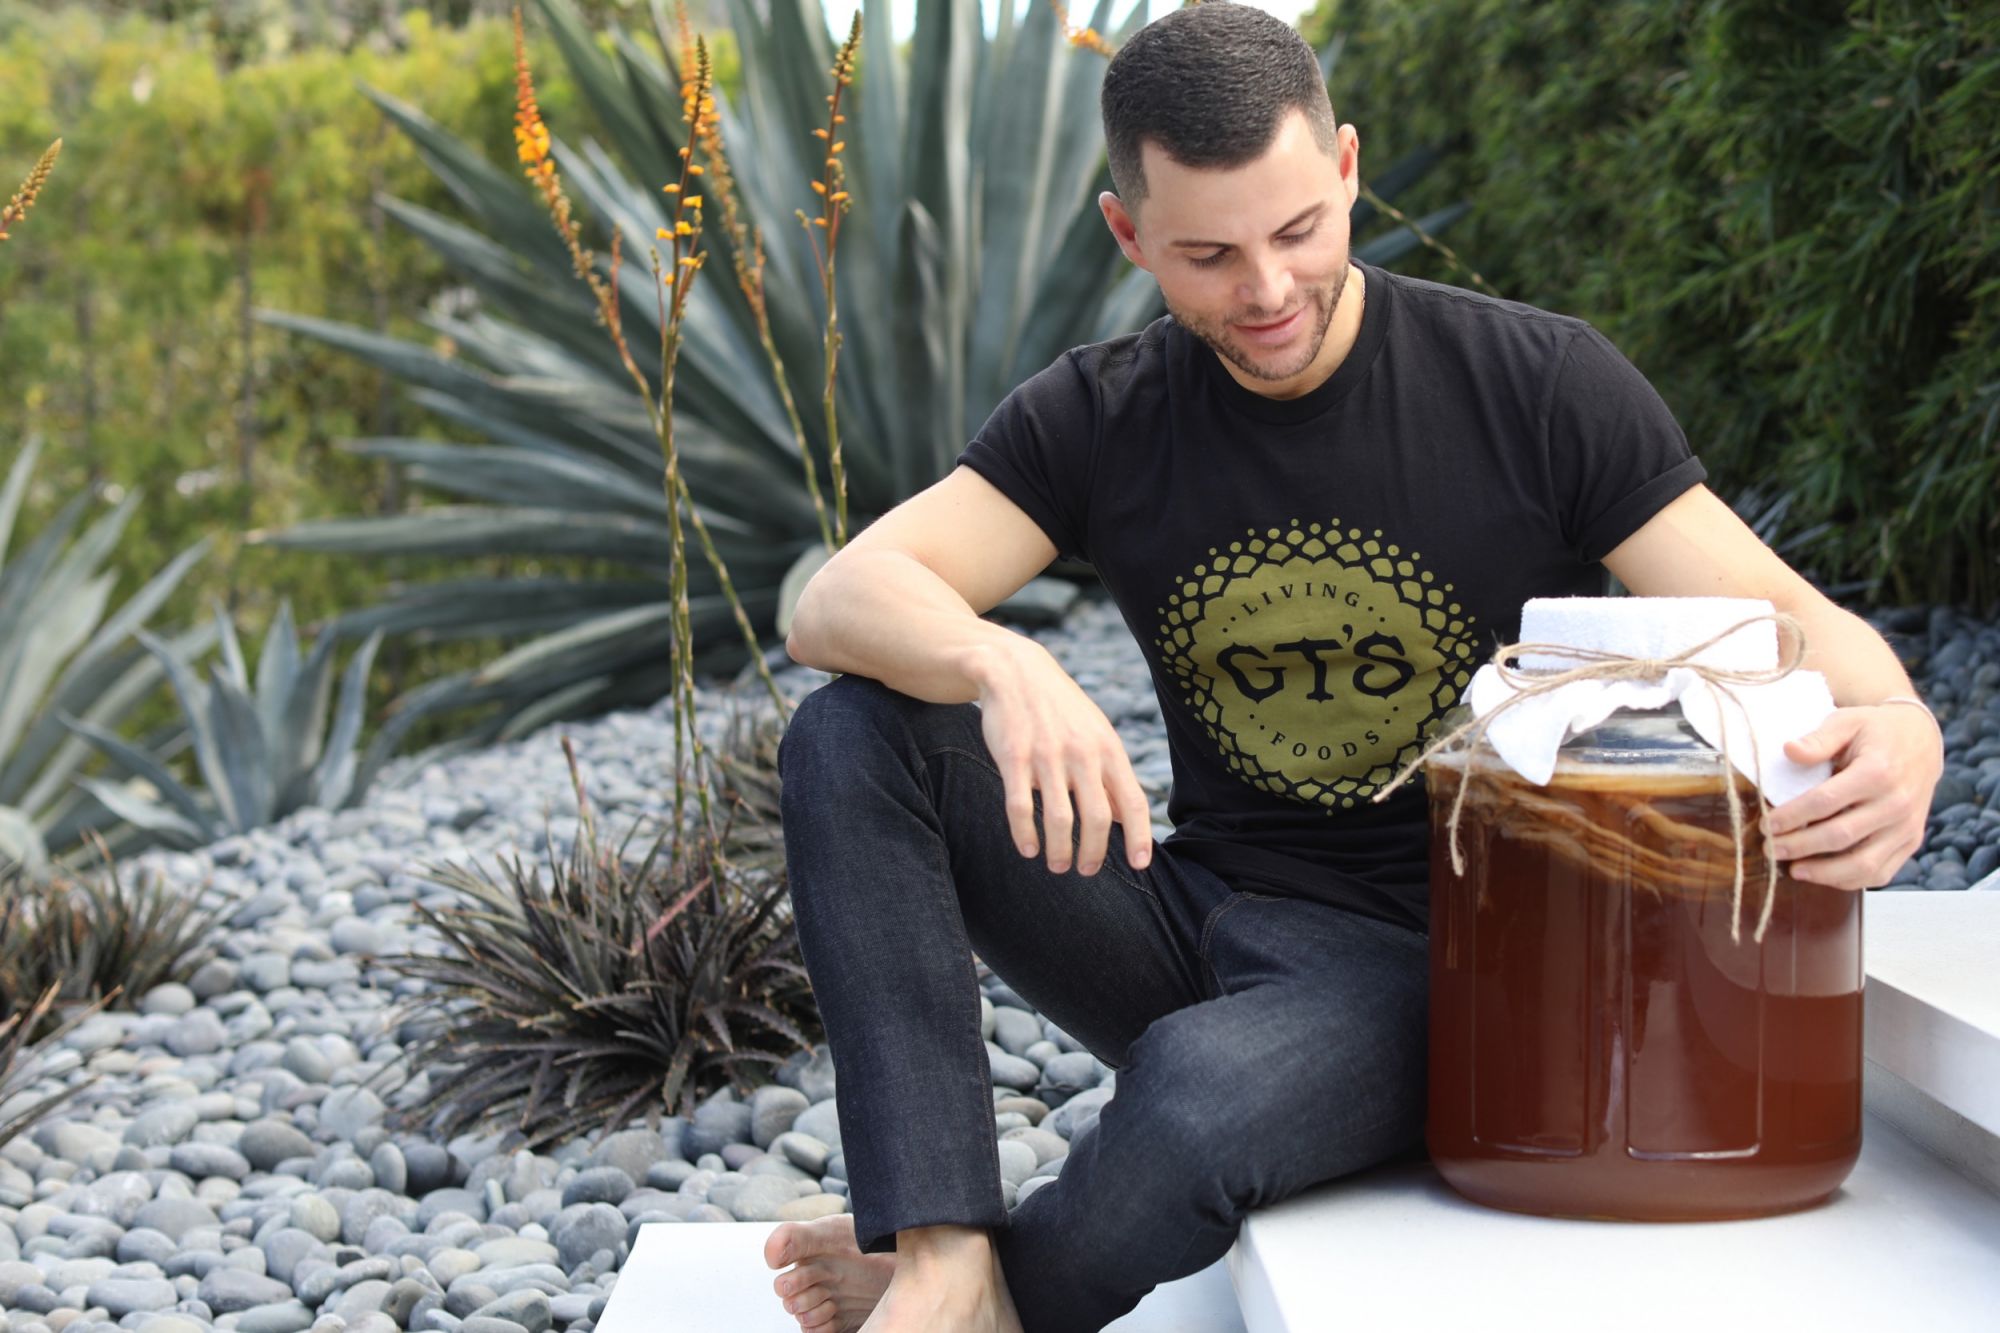 From Mom’s Cancer to the Kombucha Kingdom: How GT Dave Built His Empire